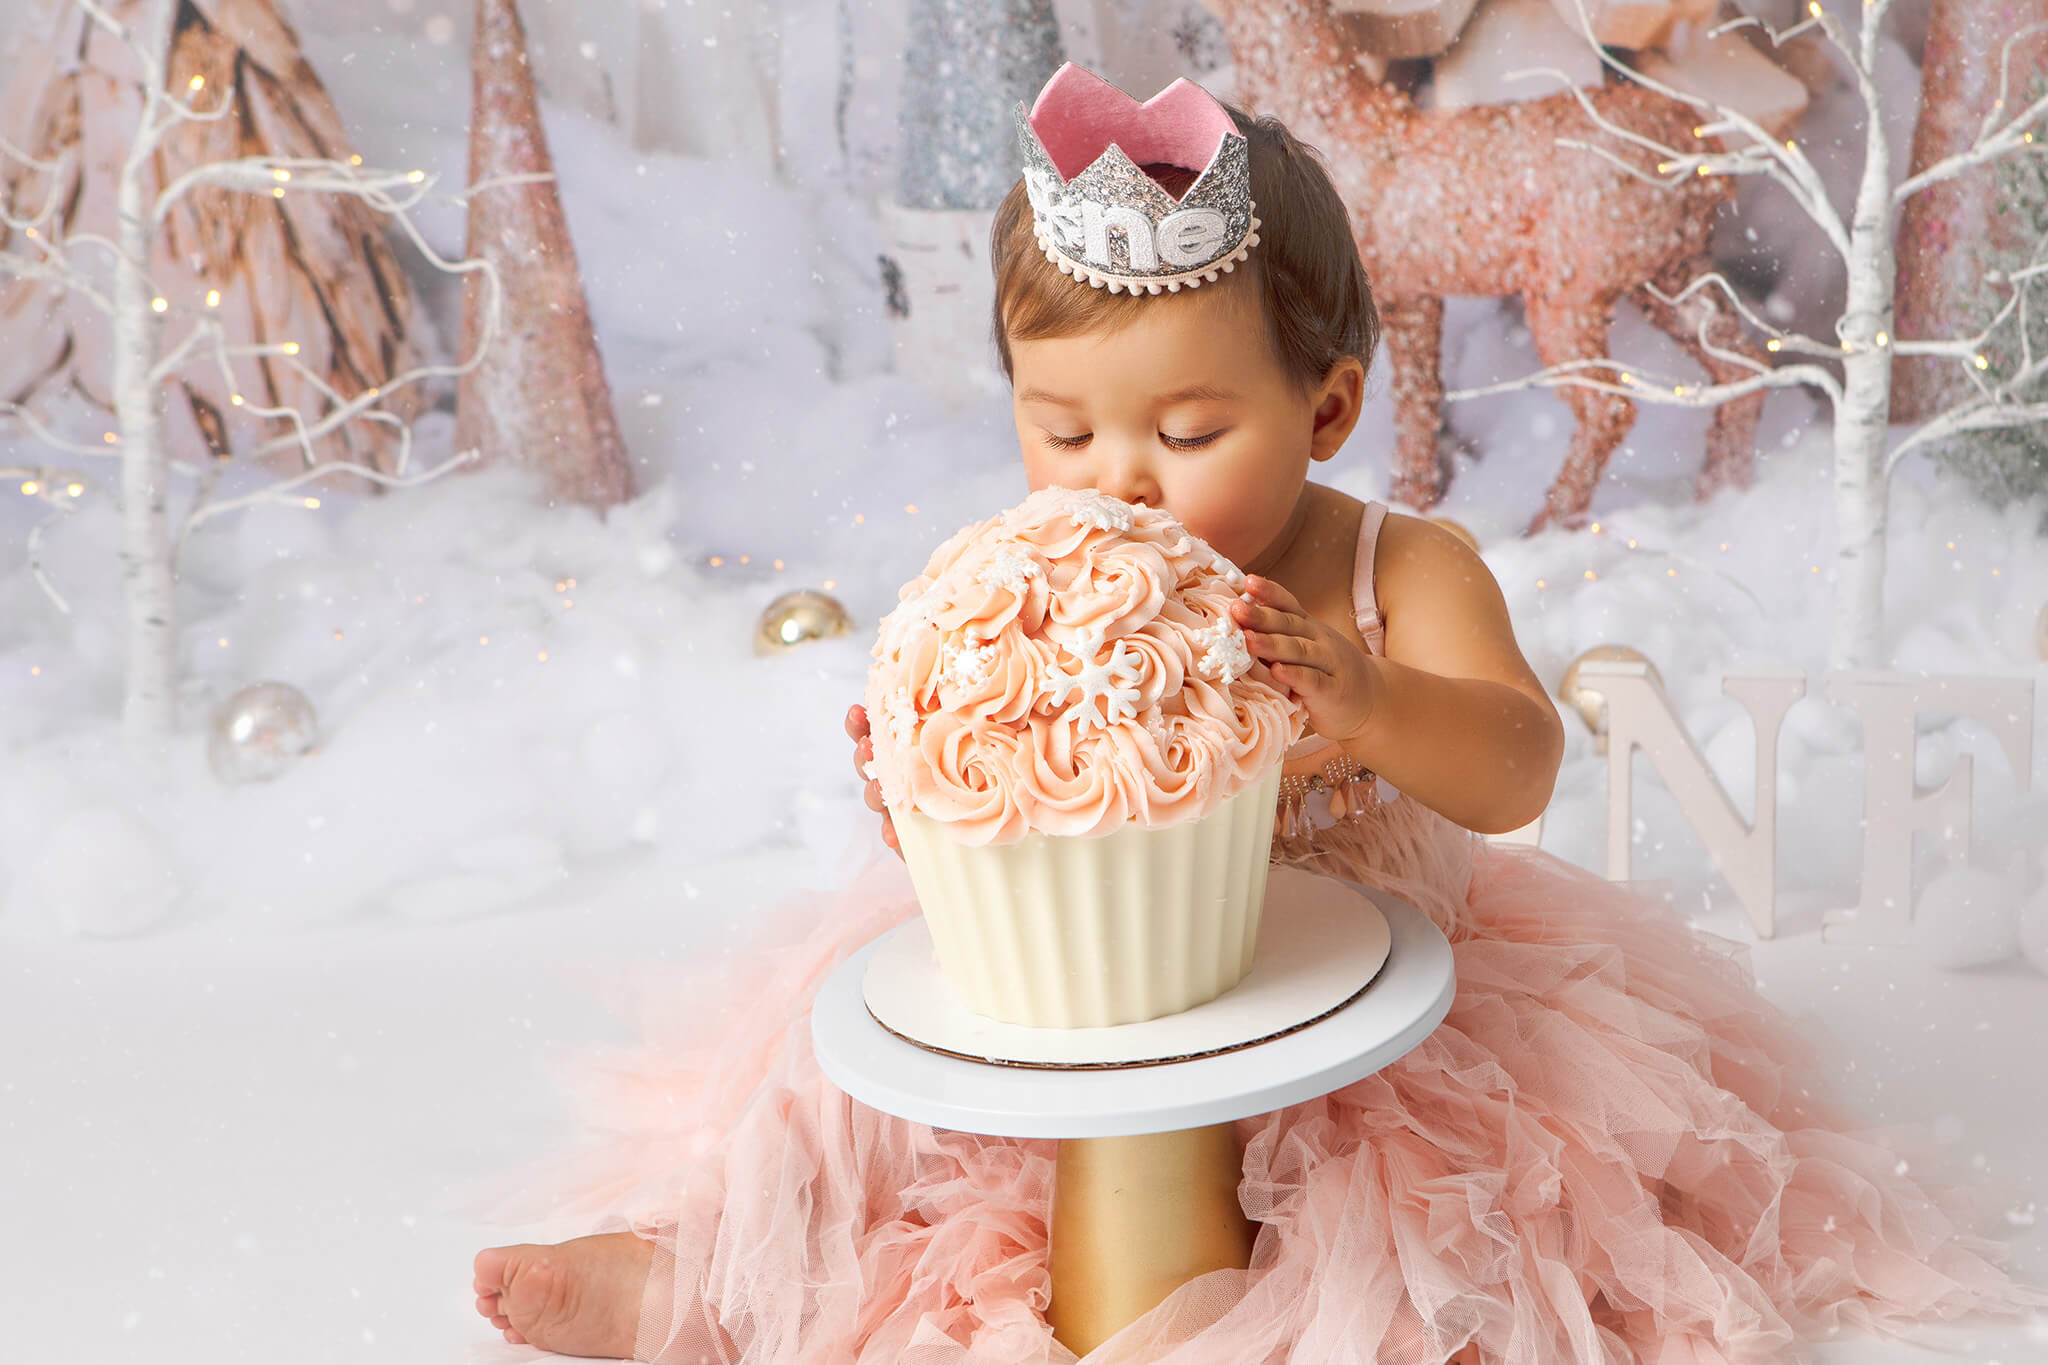 Baby girl with eyes closed eating her first giant cupcake for her birthday - Best Birthday Cakes in Los Angeles